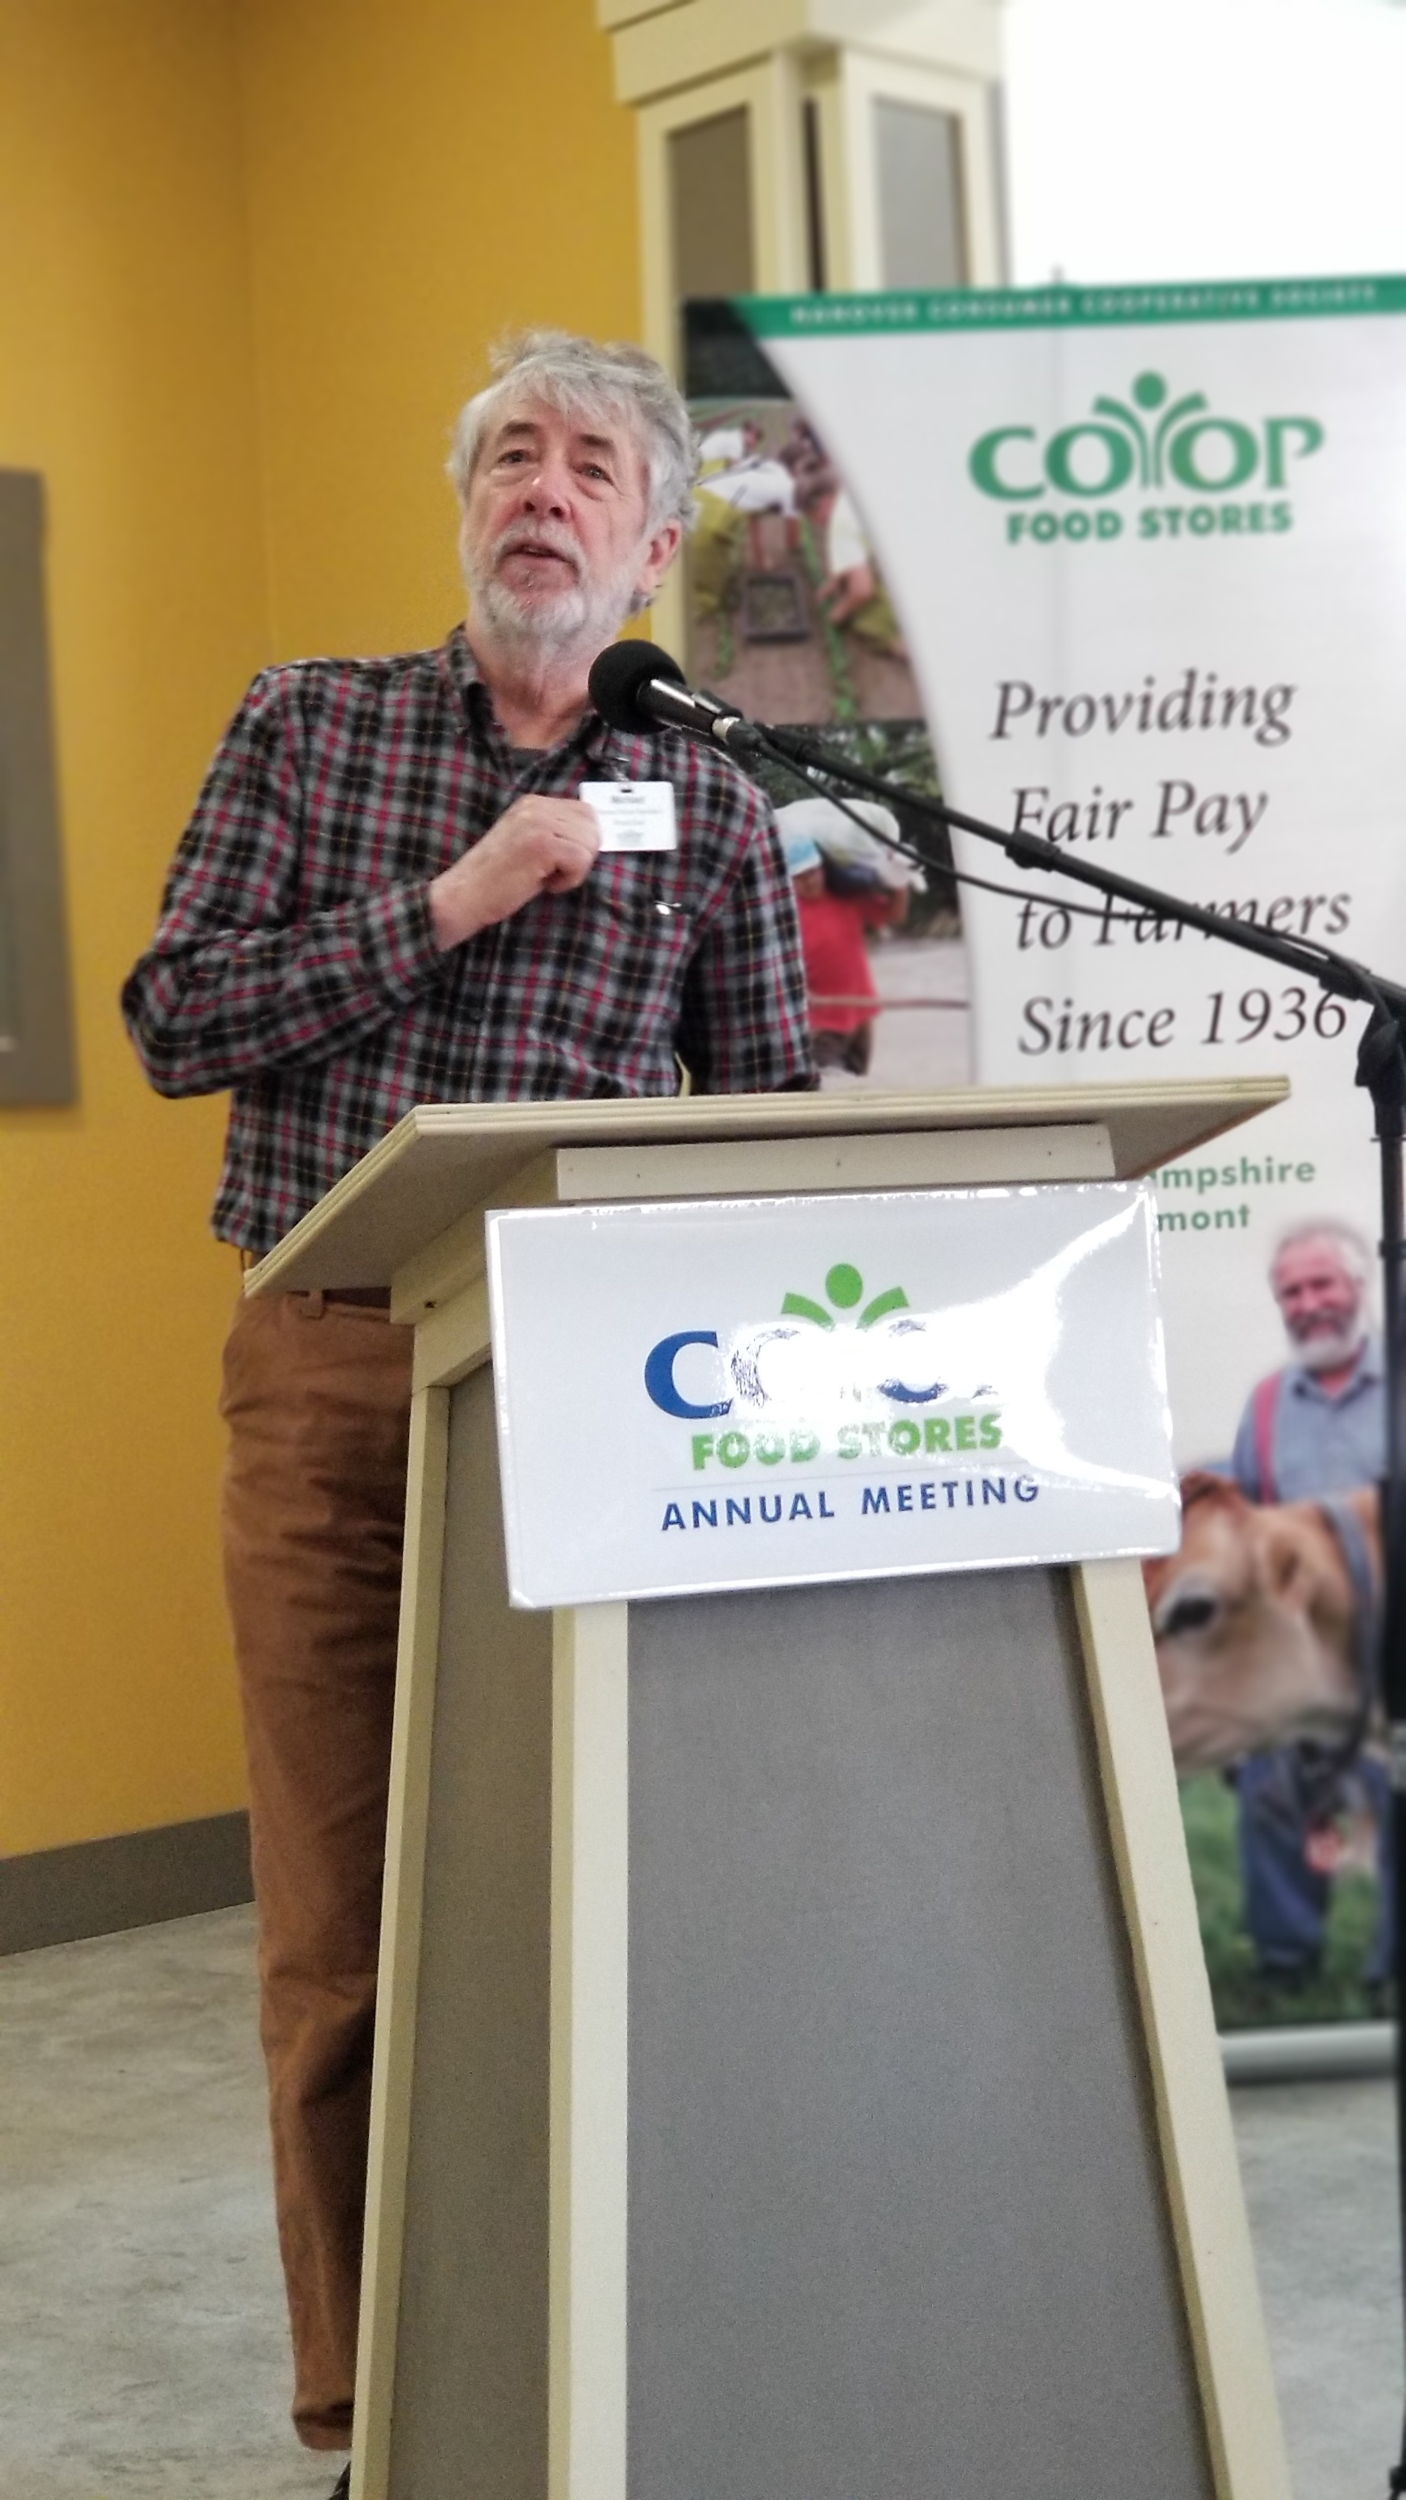 Michael Whitman, 2018 recipient of the Allen and Nan King Award speaks about the value of community. Whitman was presented with the award at the annual meeting of the Hanover Consumer Cooperative Society.